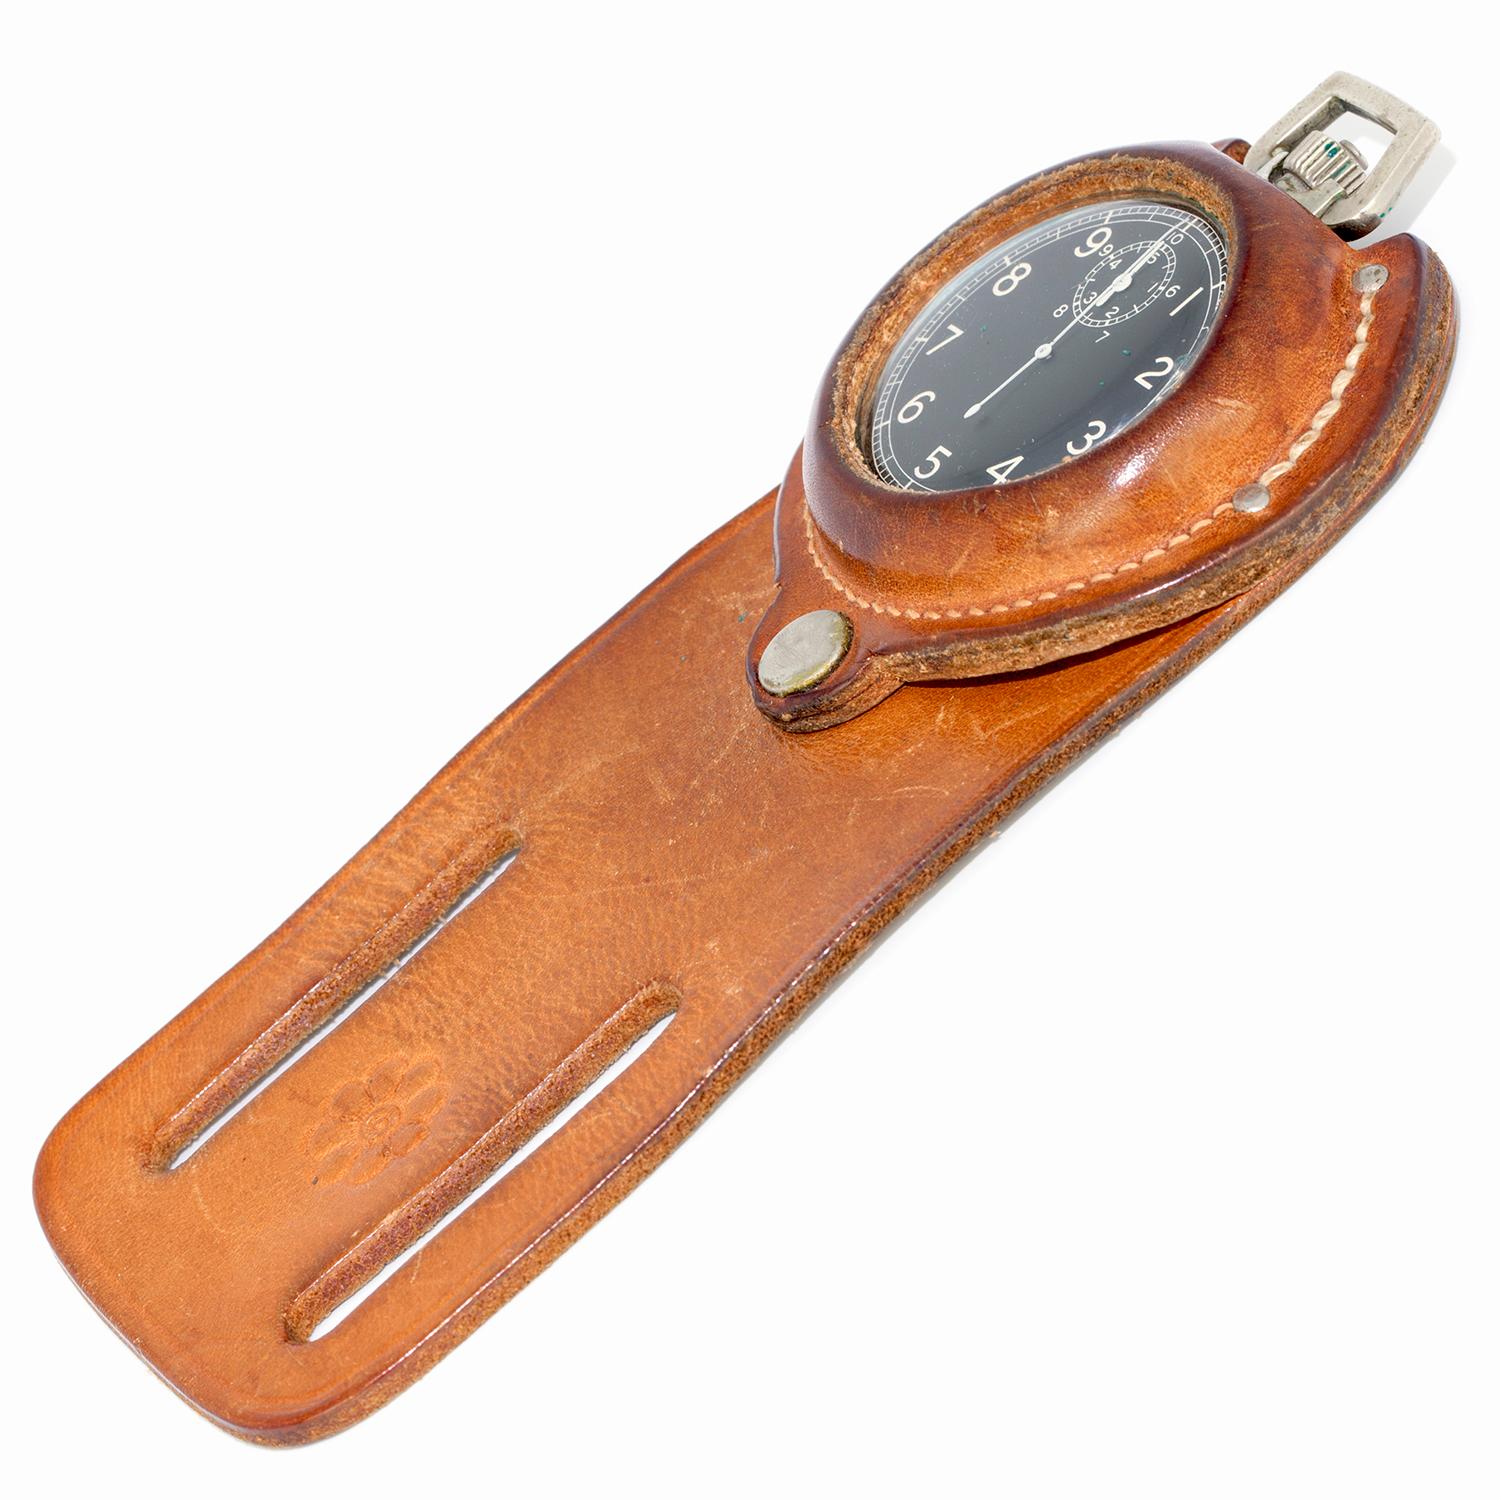 Elgin Military Stop Watch Suspended from a Leather Holster, an Equestrians Must For Sale